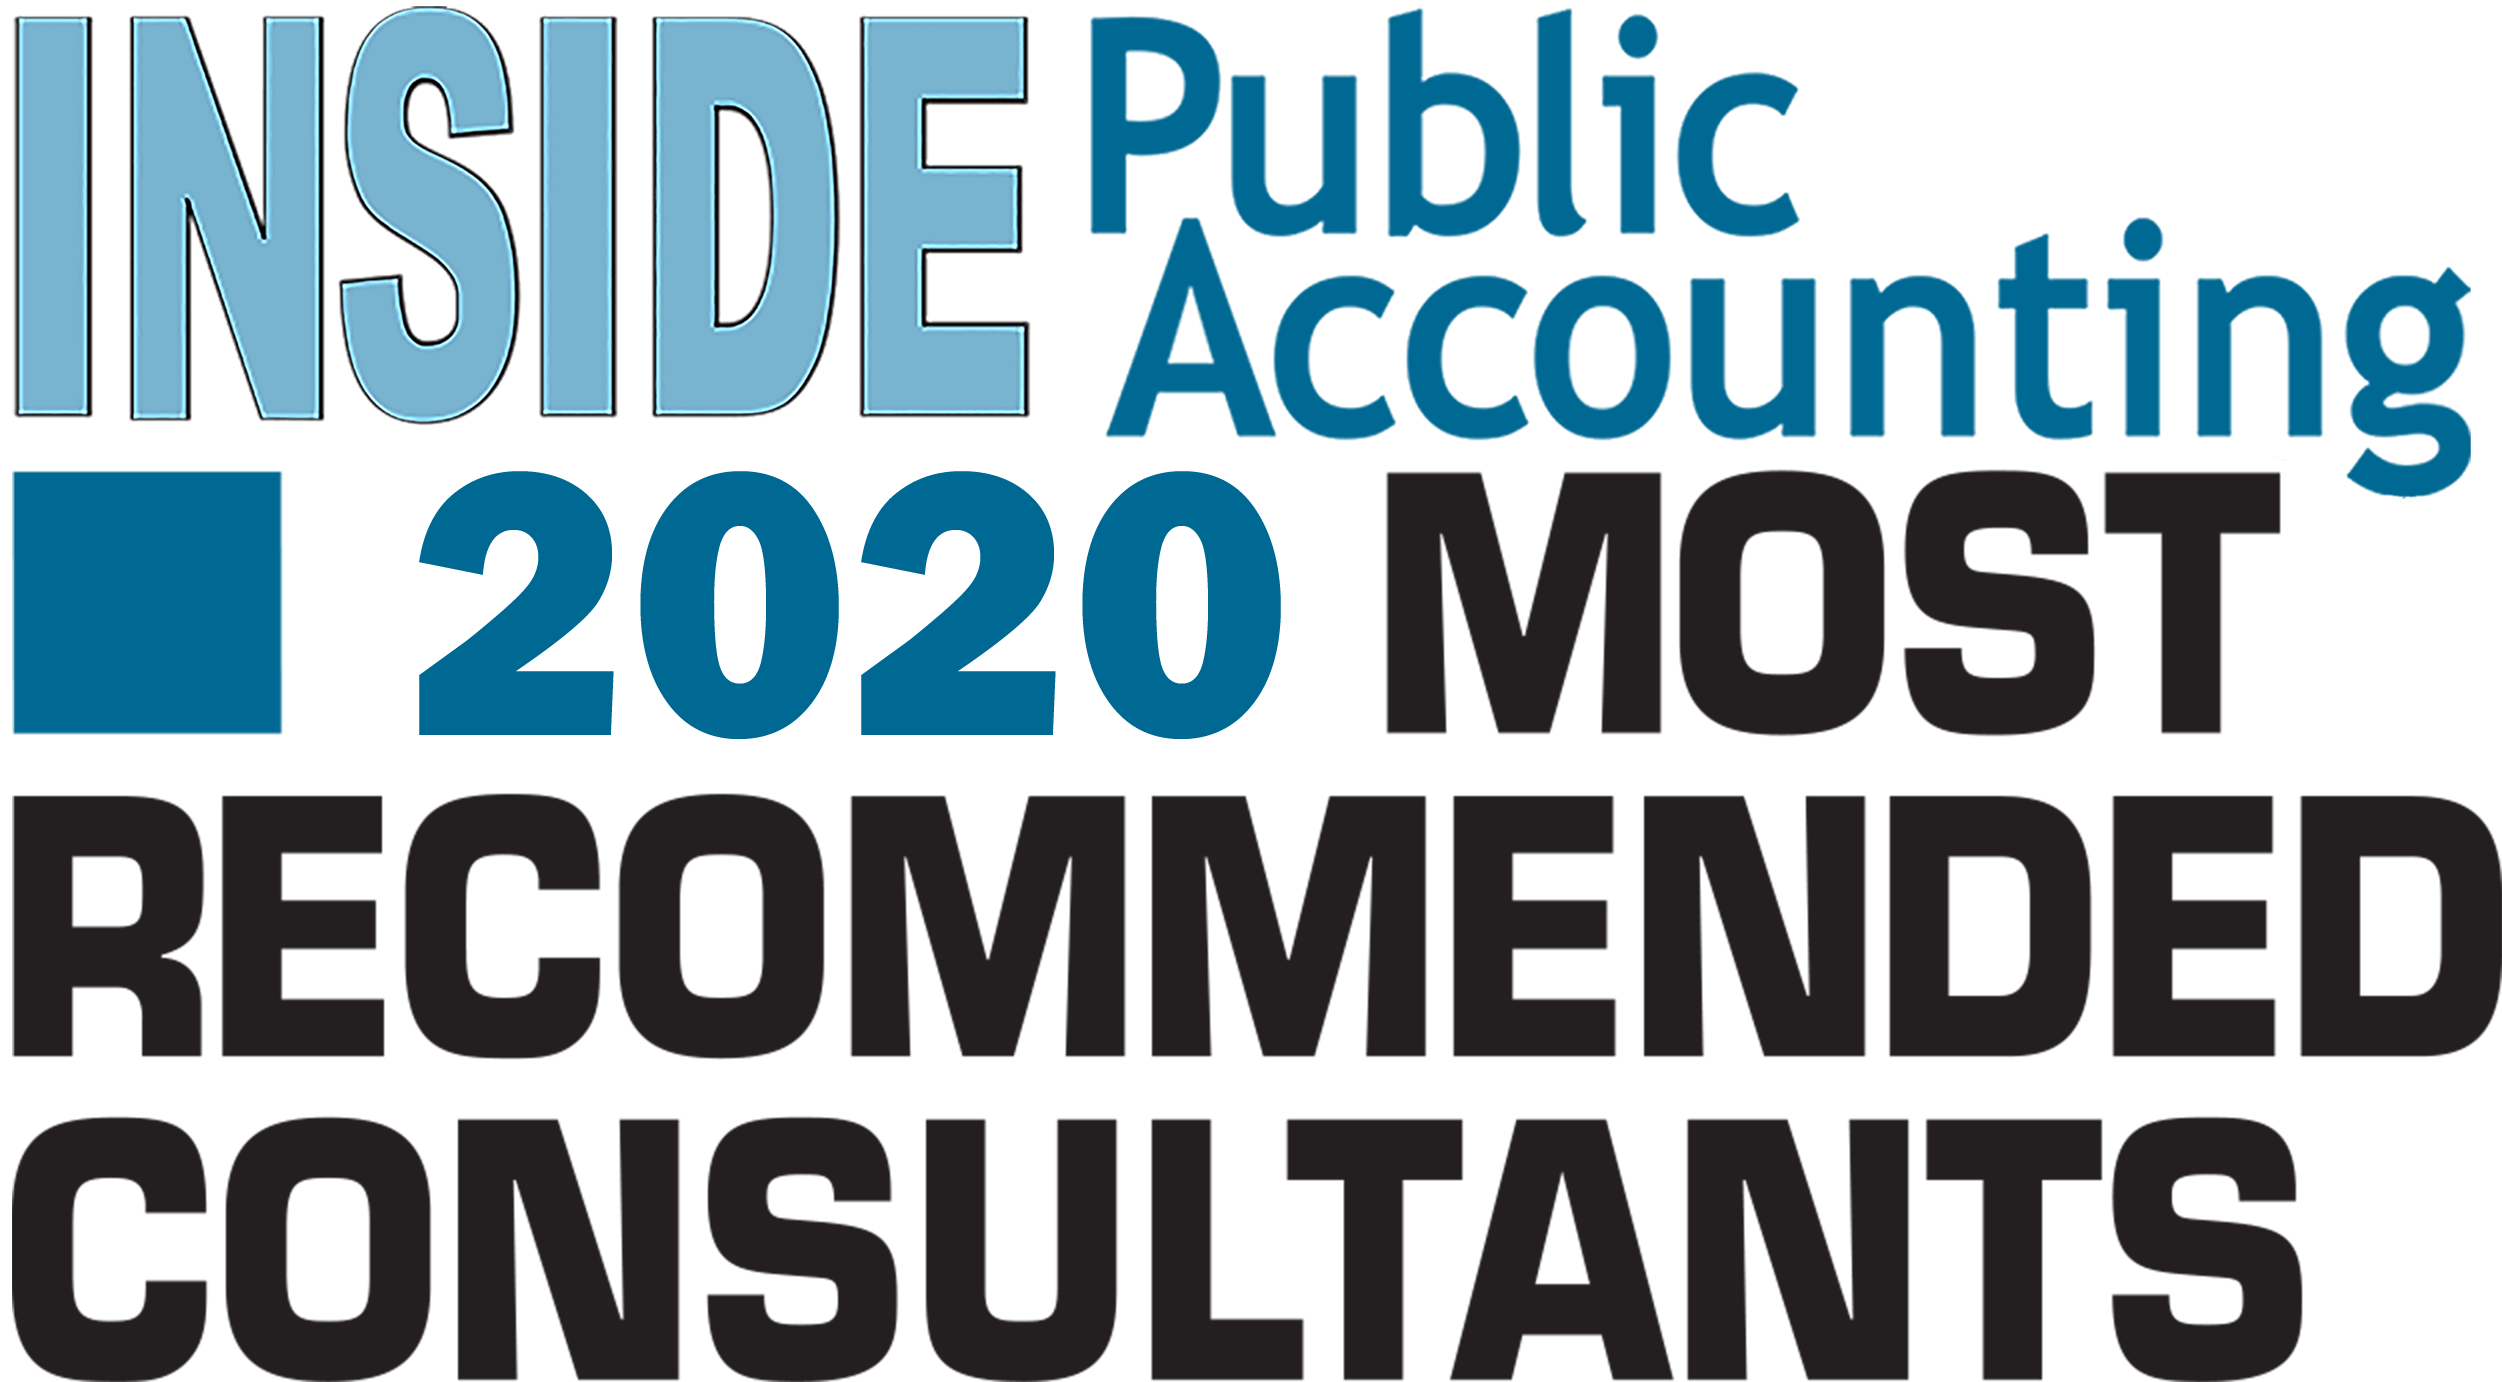 WRC Named to IPA ‘2020 Most Recommended Consultants’ List